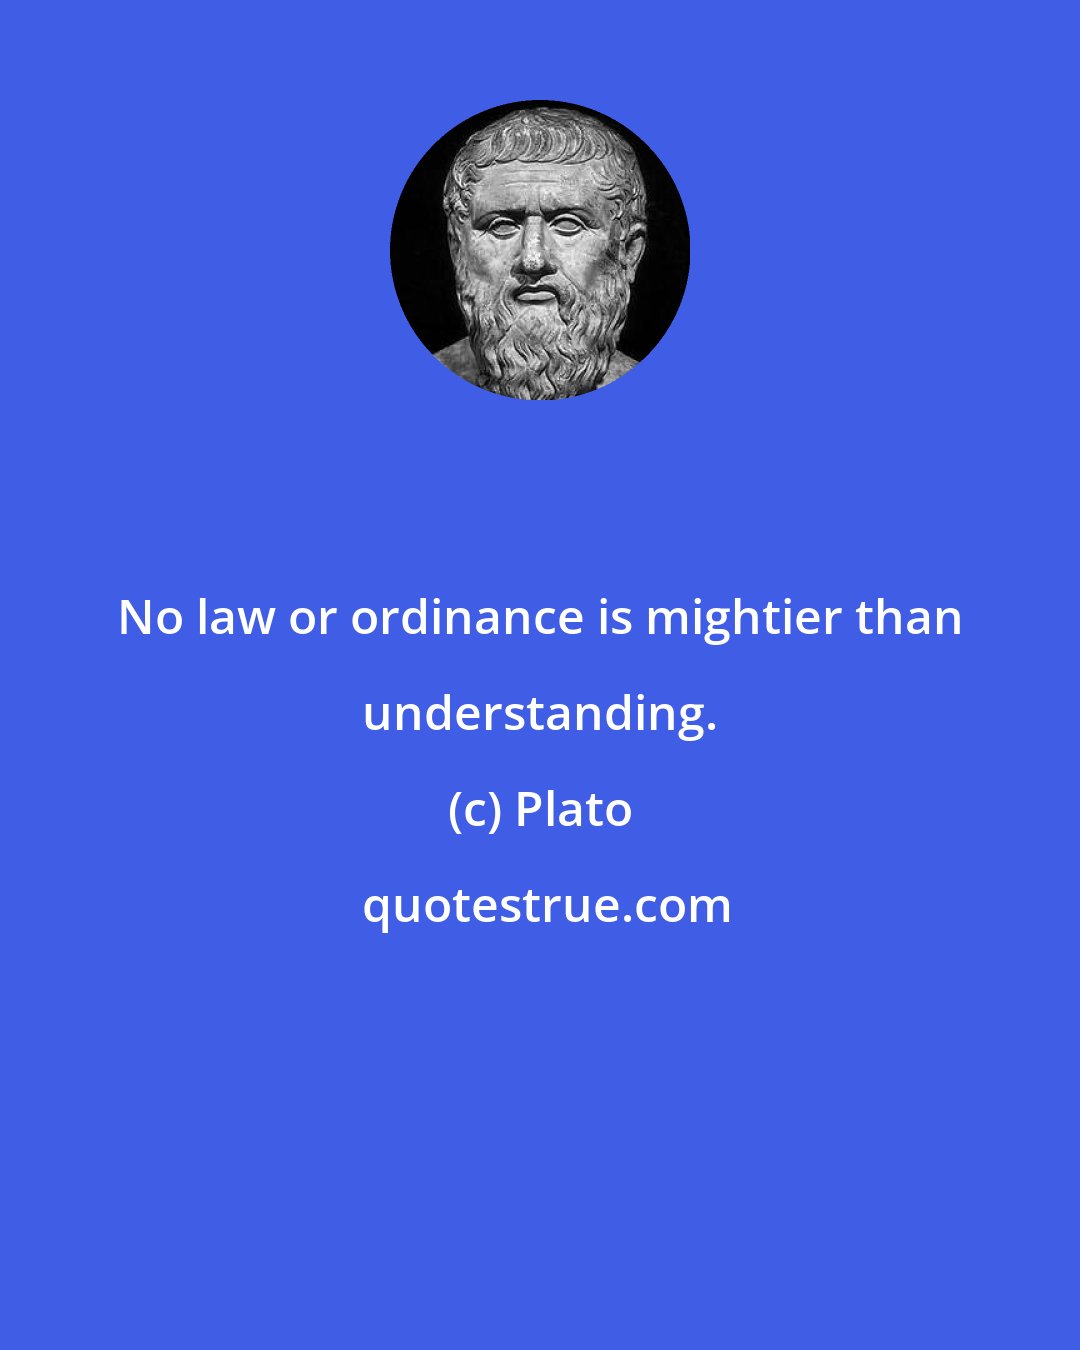 Plato: No law or ordinance is mightier than understanding.